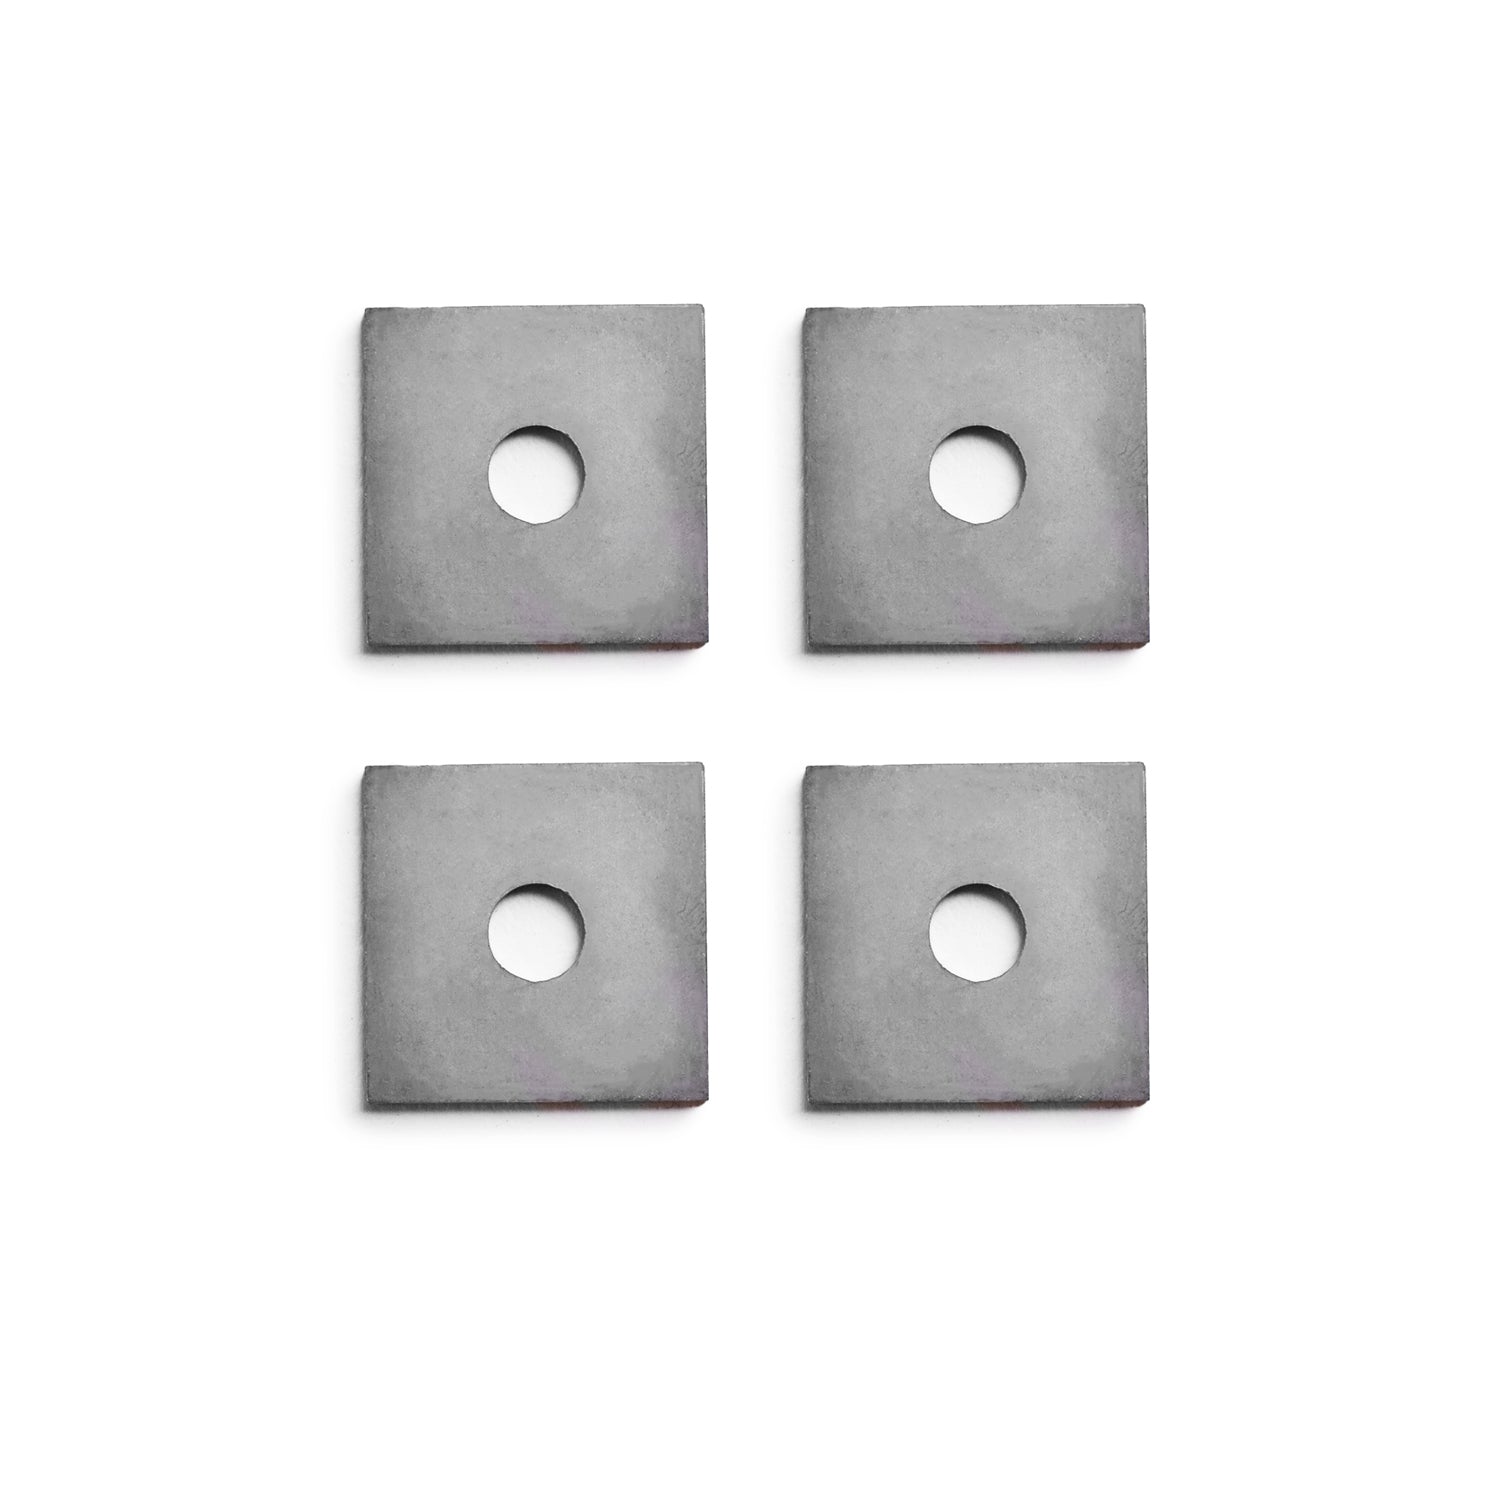 MegaMaxx UK™ Stainless Steel Square Washers (3 Sizes Available) - Indoor Outdoors